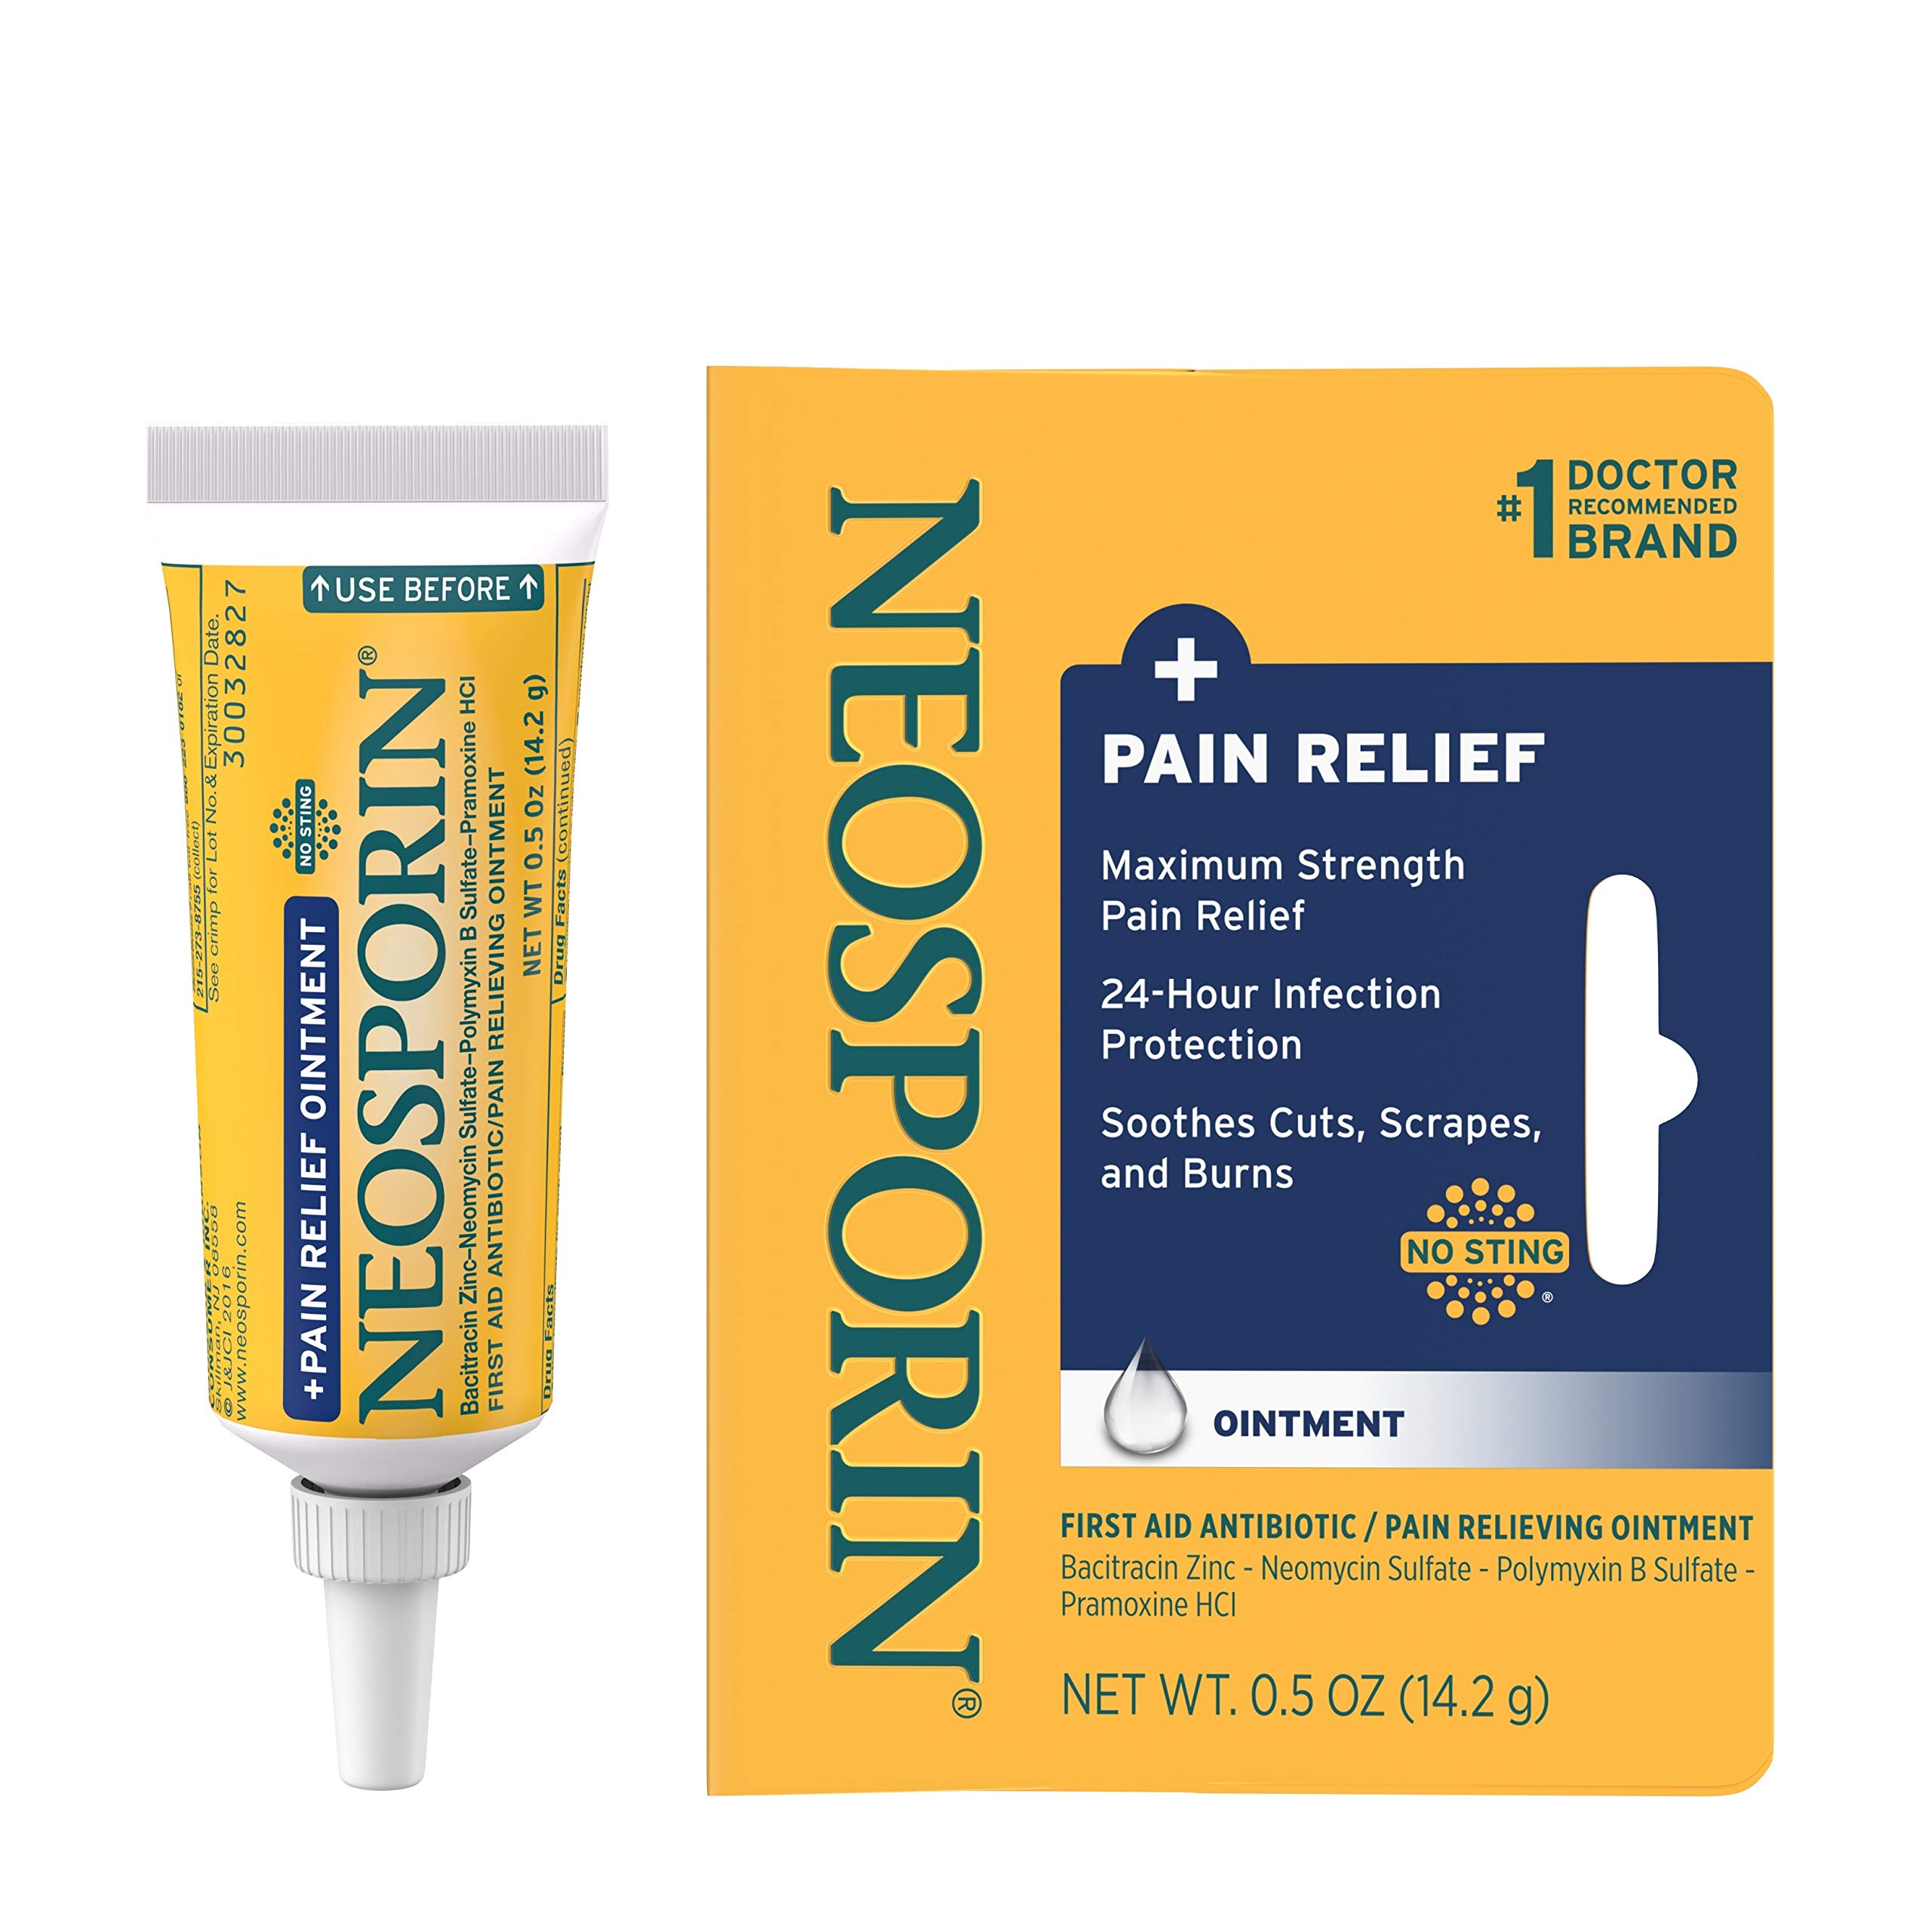 0.5-Oz Neosporin + Maximum-Strength Pain Relief Dual Action Antibiotic Ointment w/ Bacitracin Zinc $3.49 w/ S&S + Free Shipping w/ Prime or on $35+